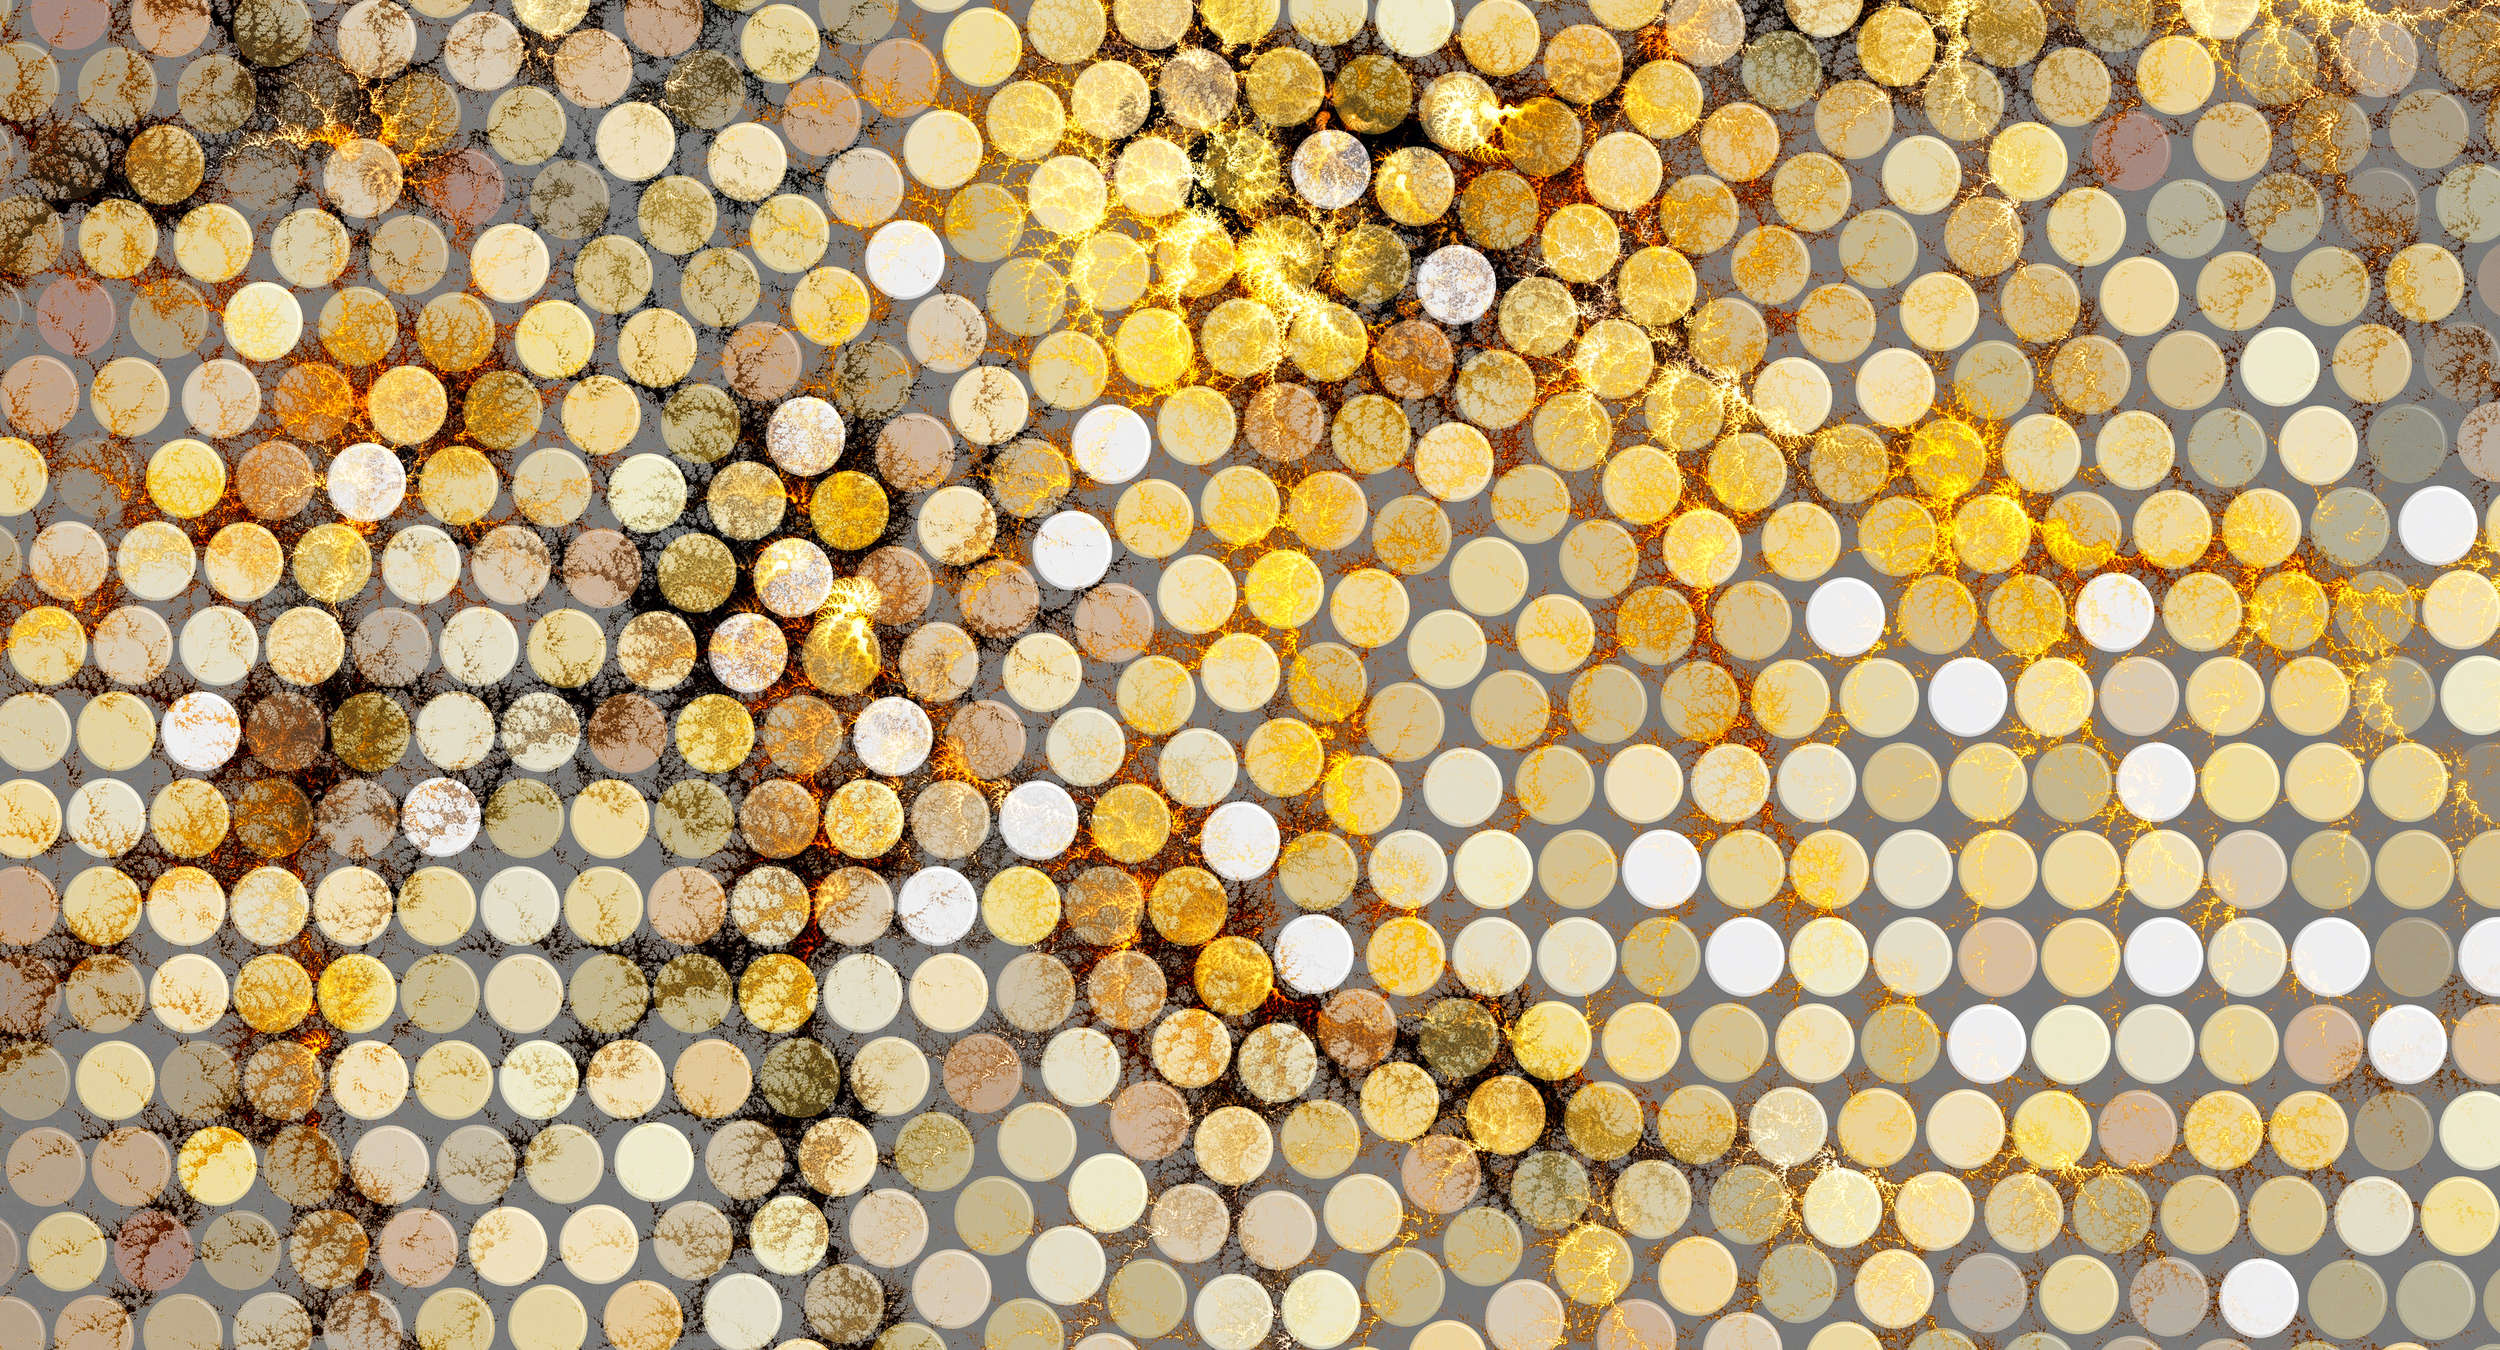             Graphic mural with dot & texture pattern - Yellow, Brown, White
        